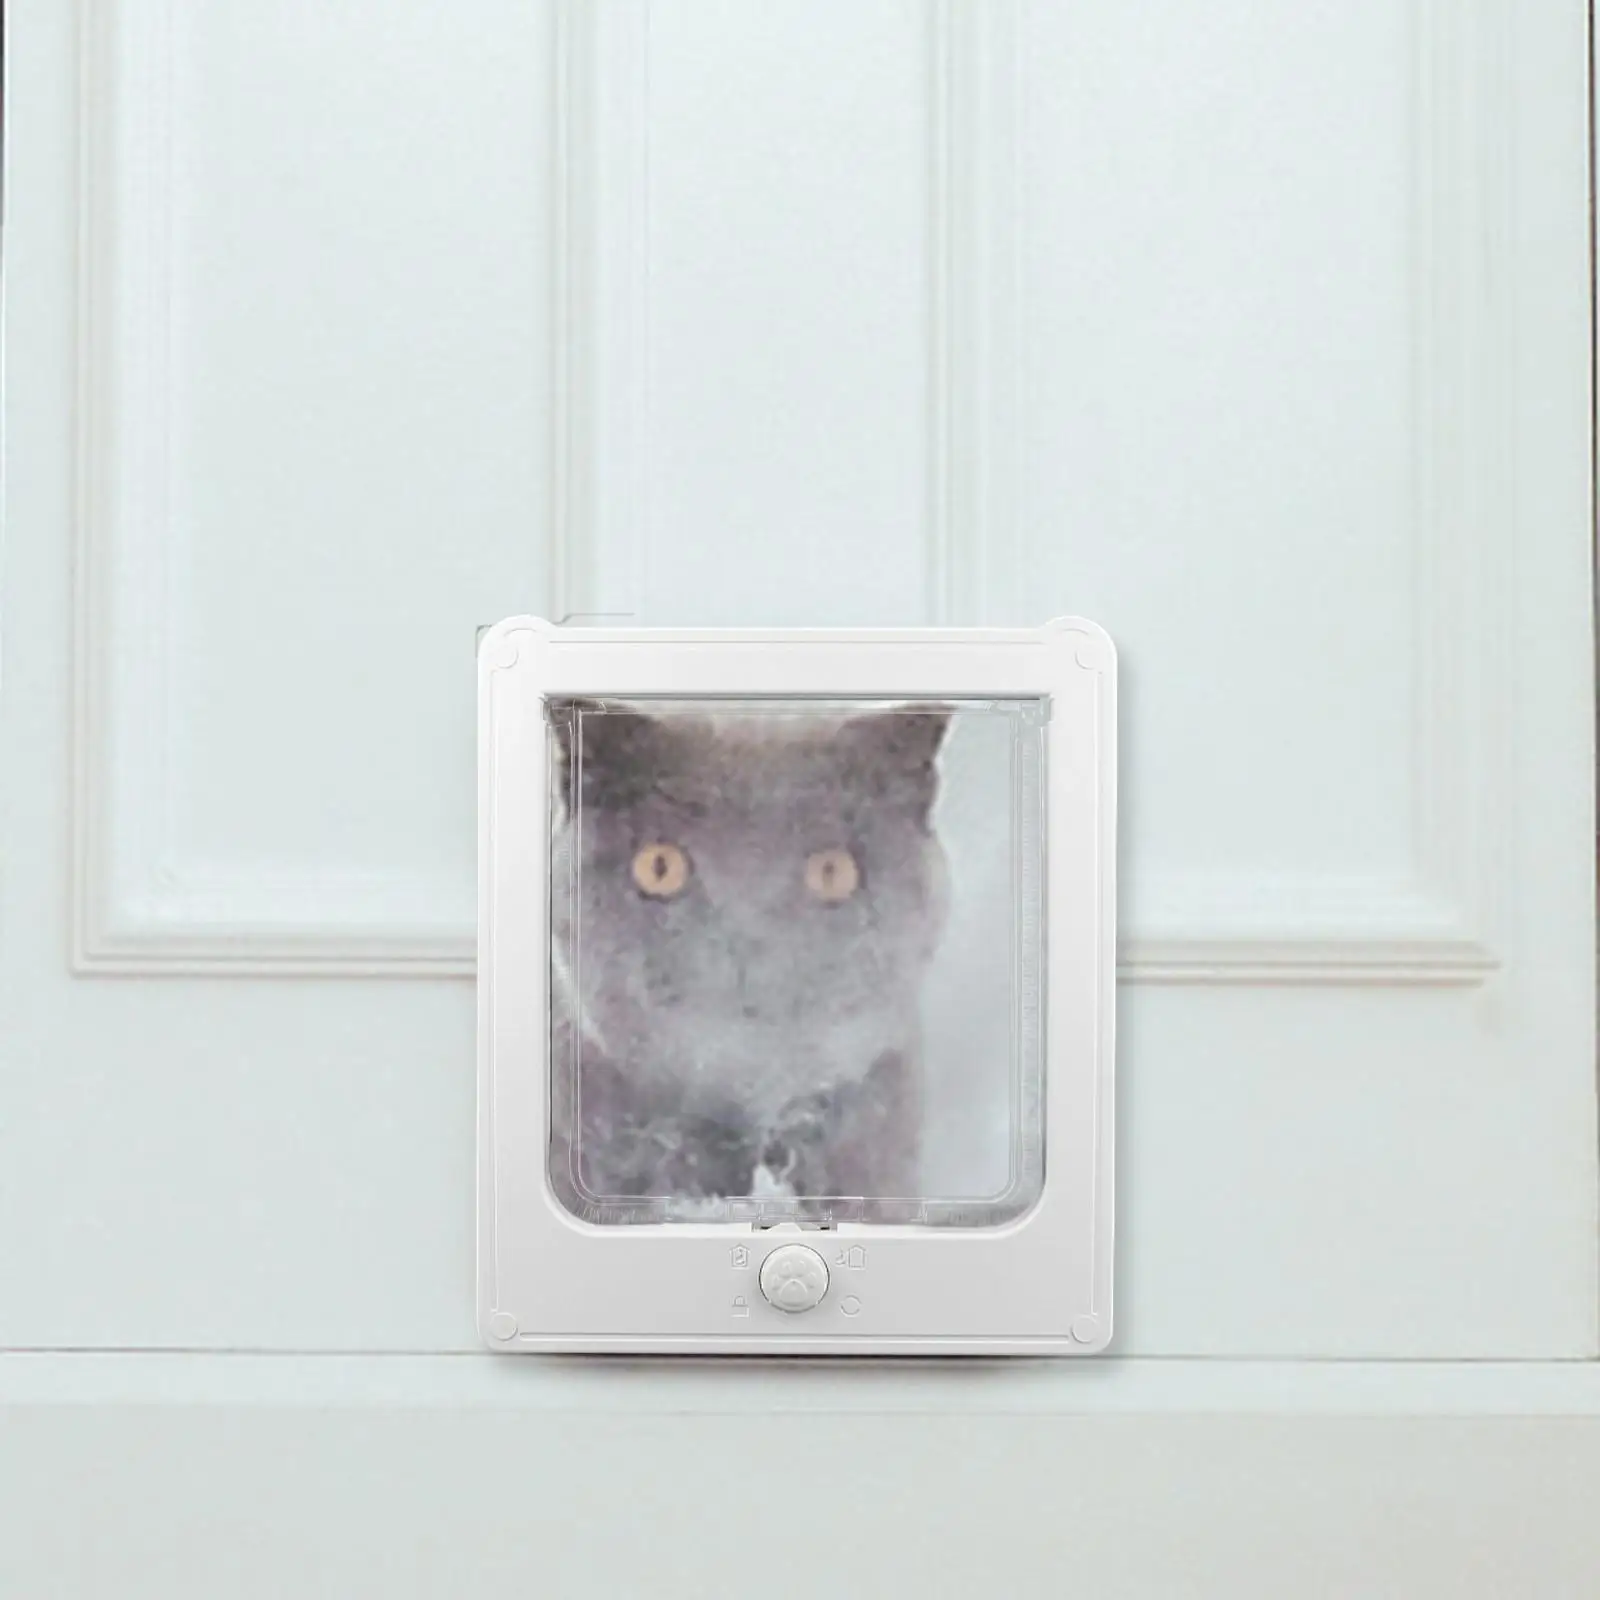 Cat Dogs Flap Doors Mute Kitty Gate for Small Animal Interior Exterior Doors